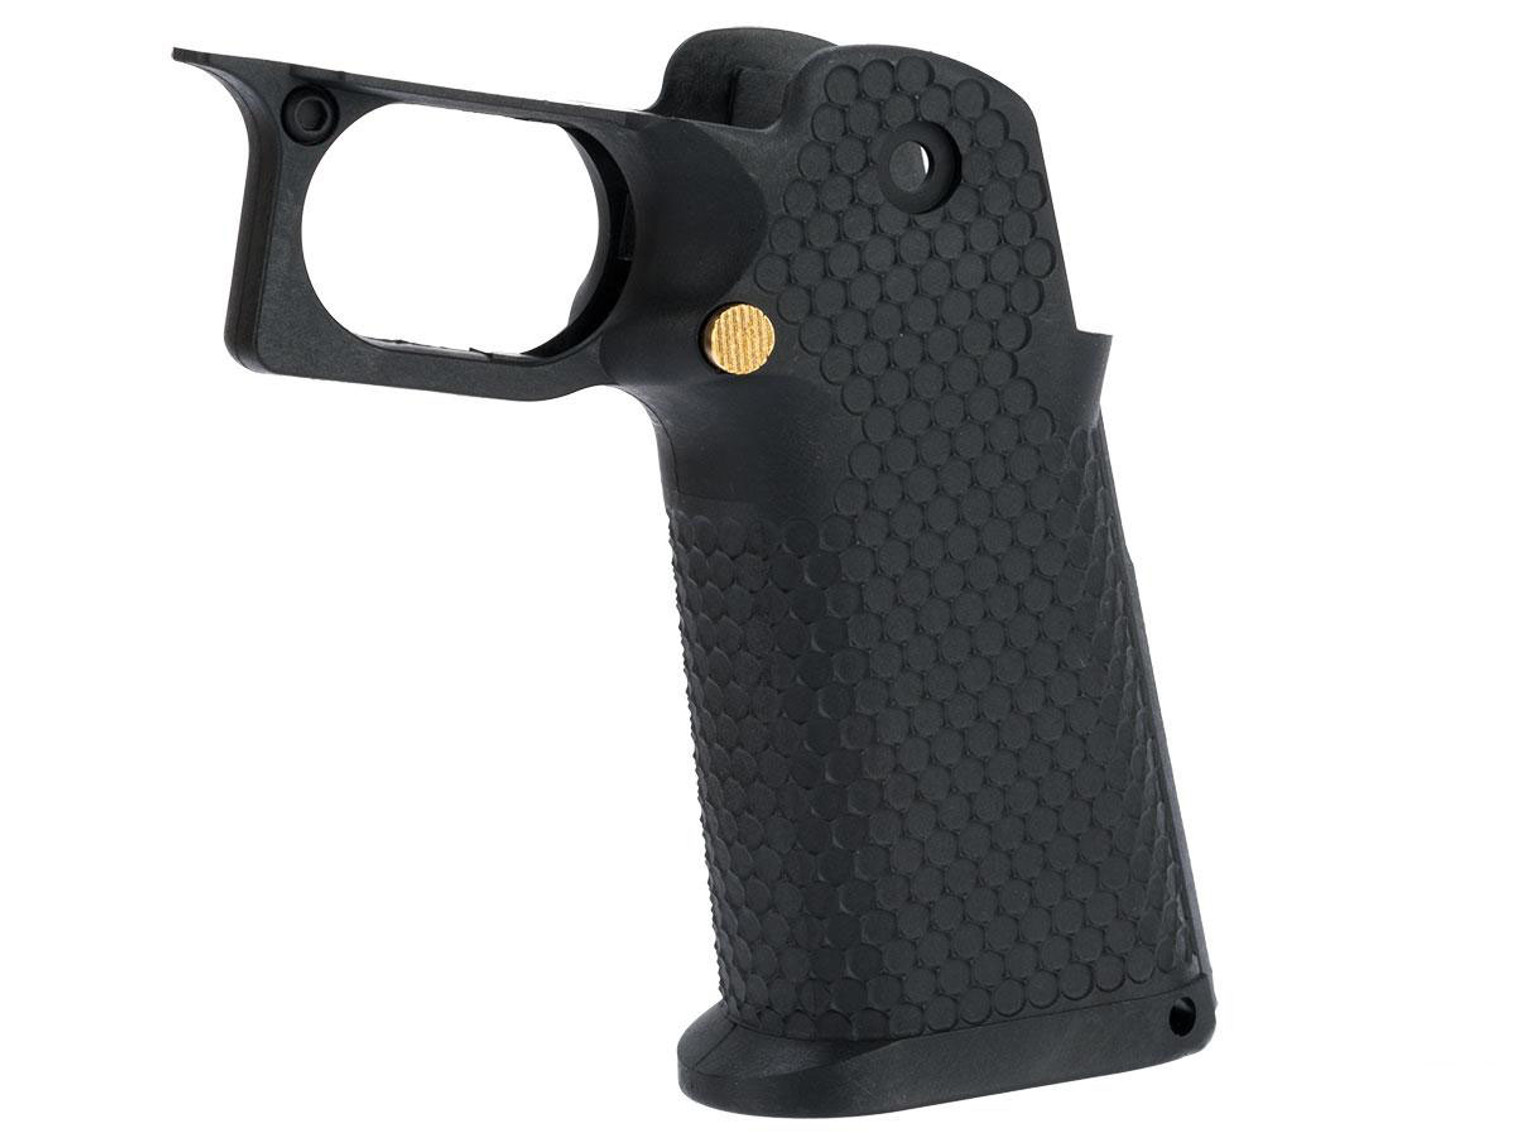 Armorer Works Custom HX Grip Kit #2 for Hi-Capa Series Gas Blowback Airsoft Pistols - Black and Gold